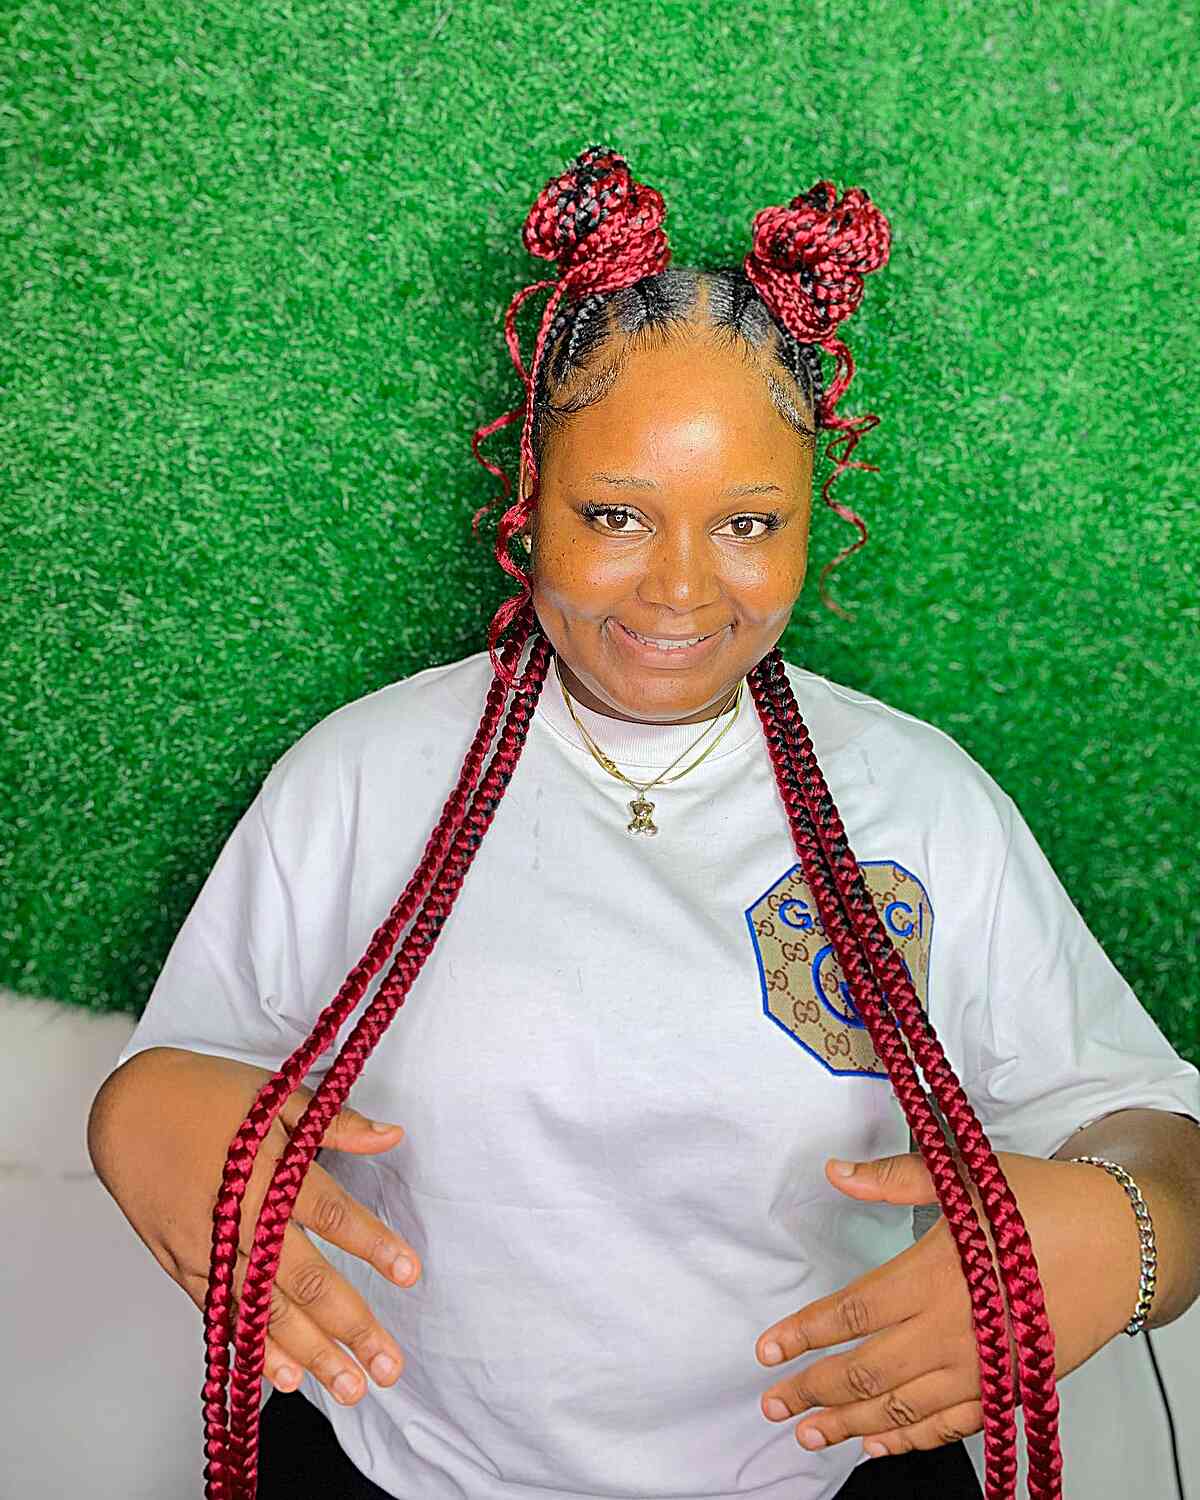 Long Vibrant Red Braids with Half-Up Space Buns for a Black Woman